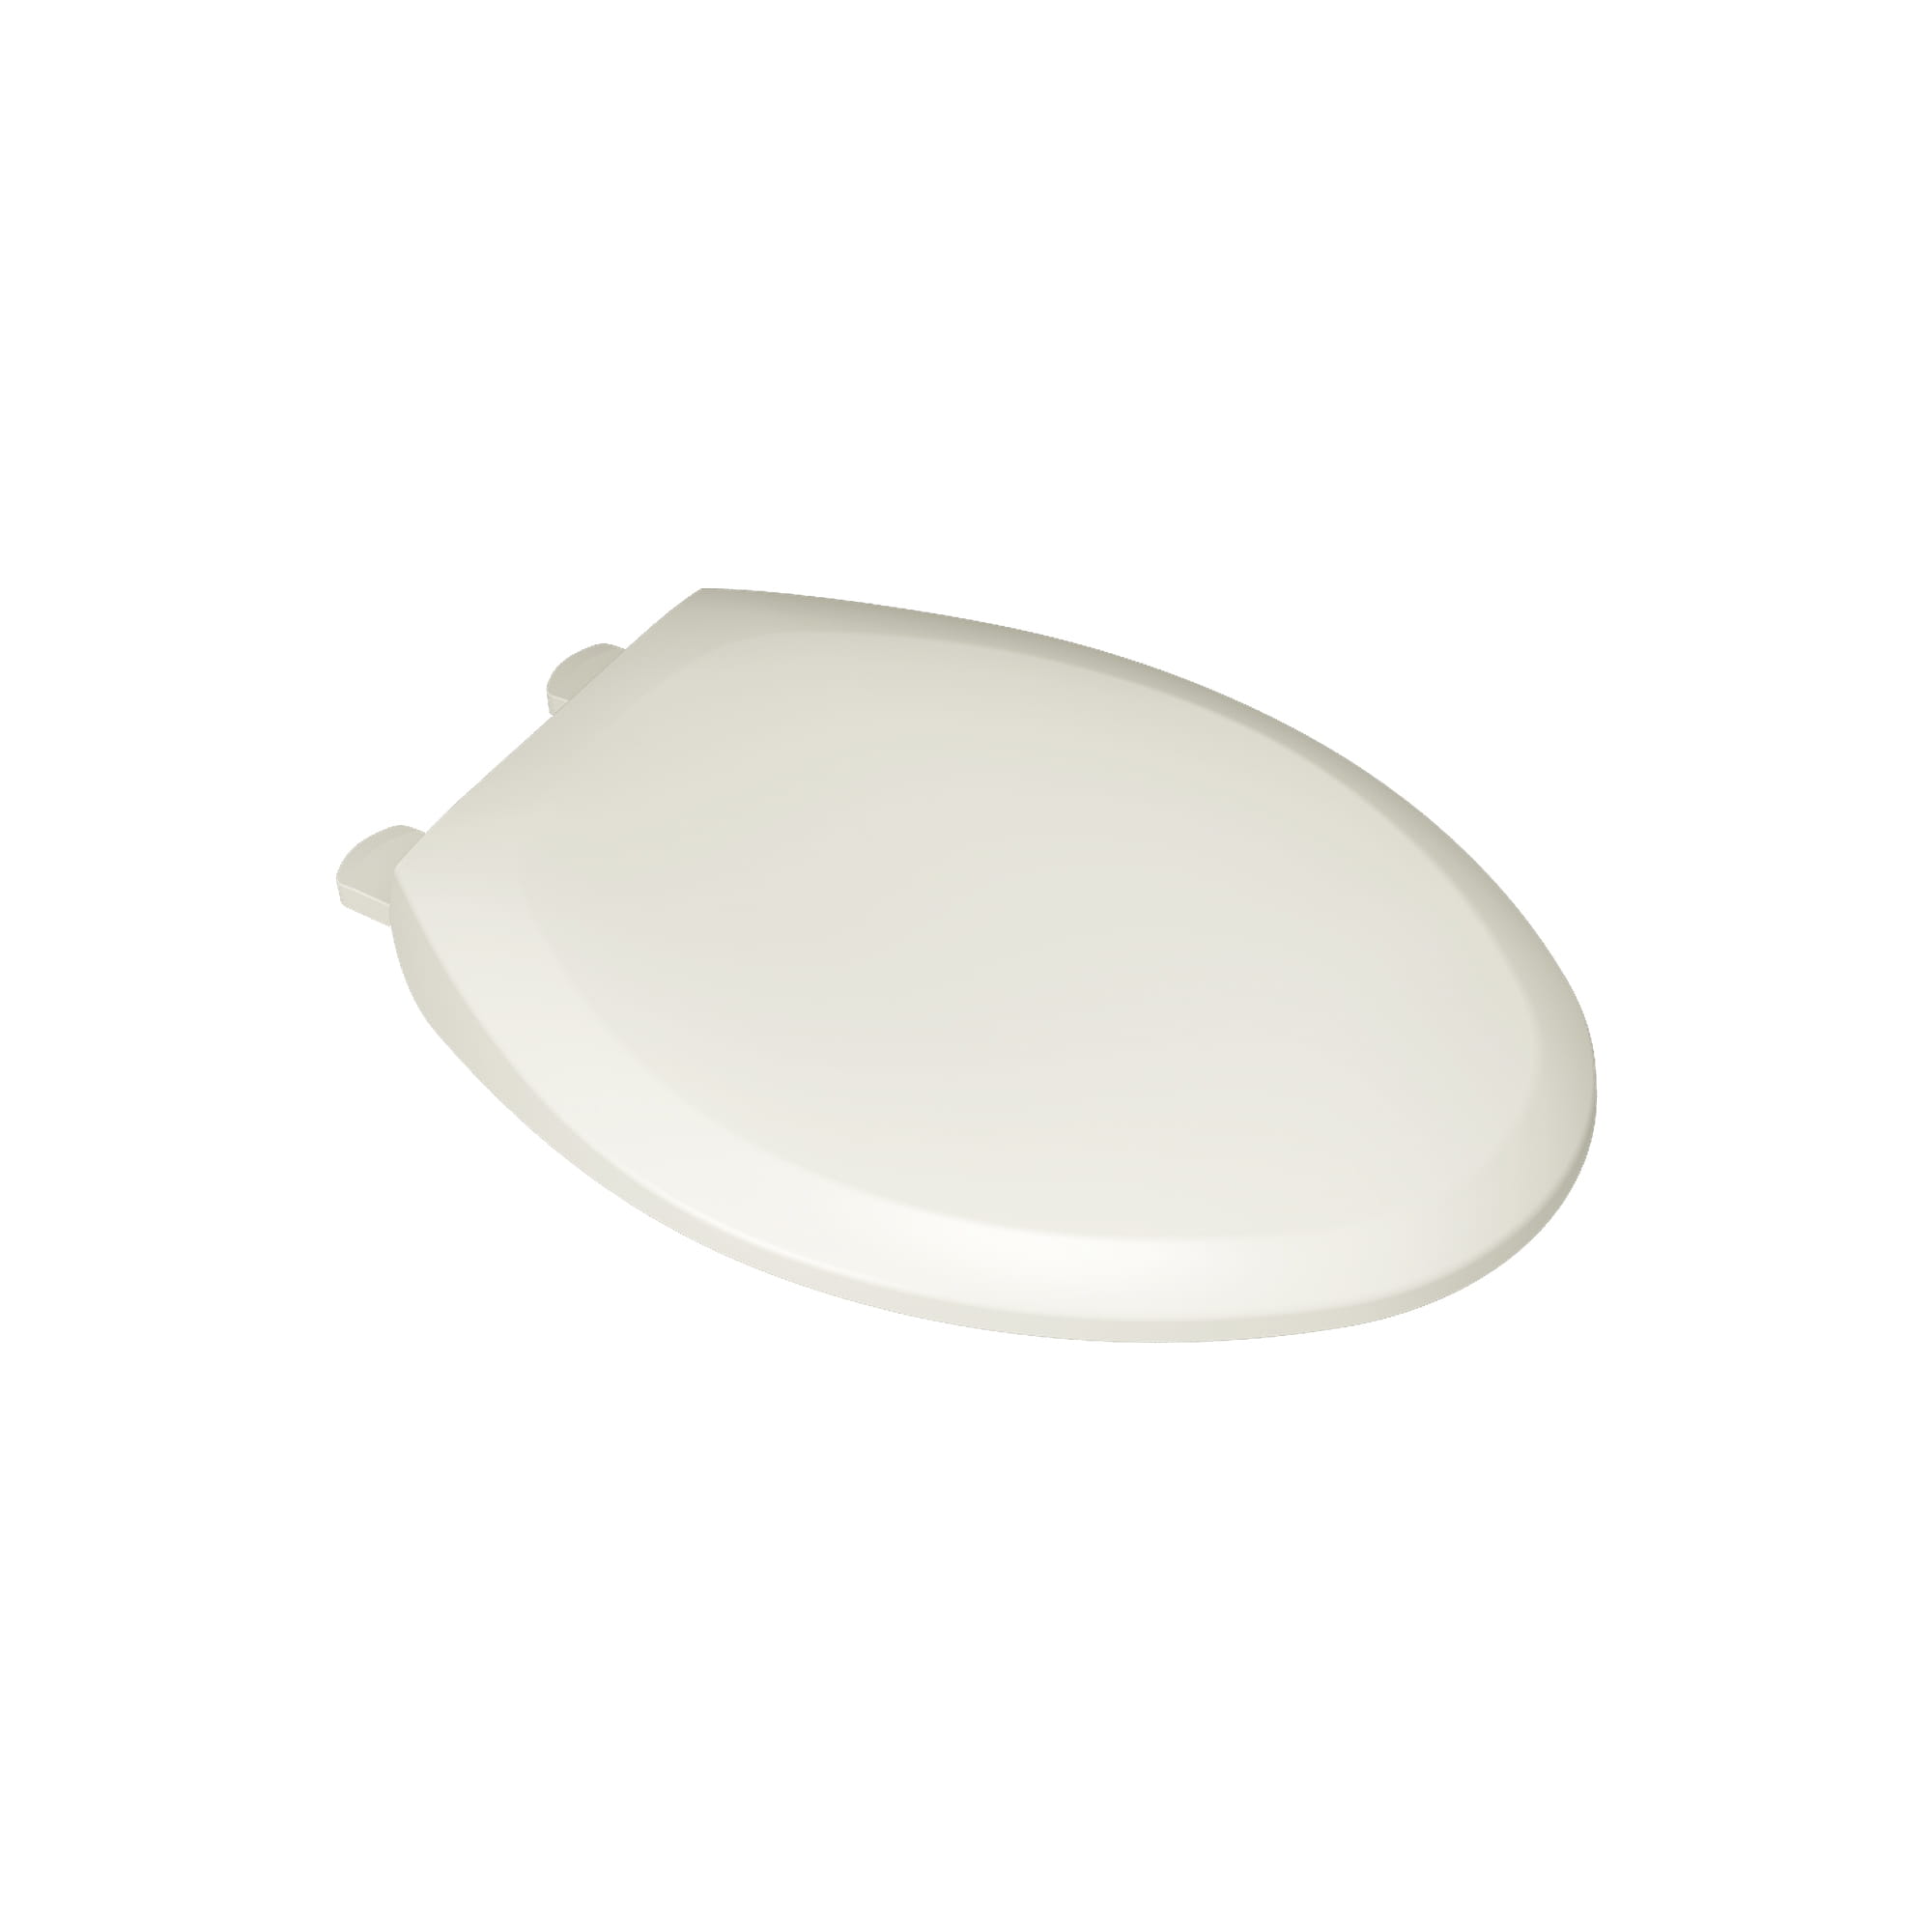 Champion® Slow-Close & Easy Lift-Off Elongated Toilet Seat